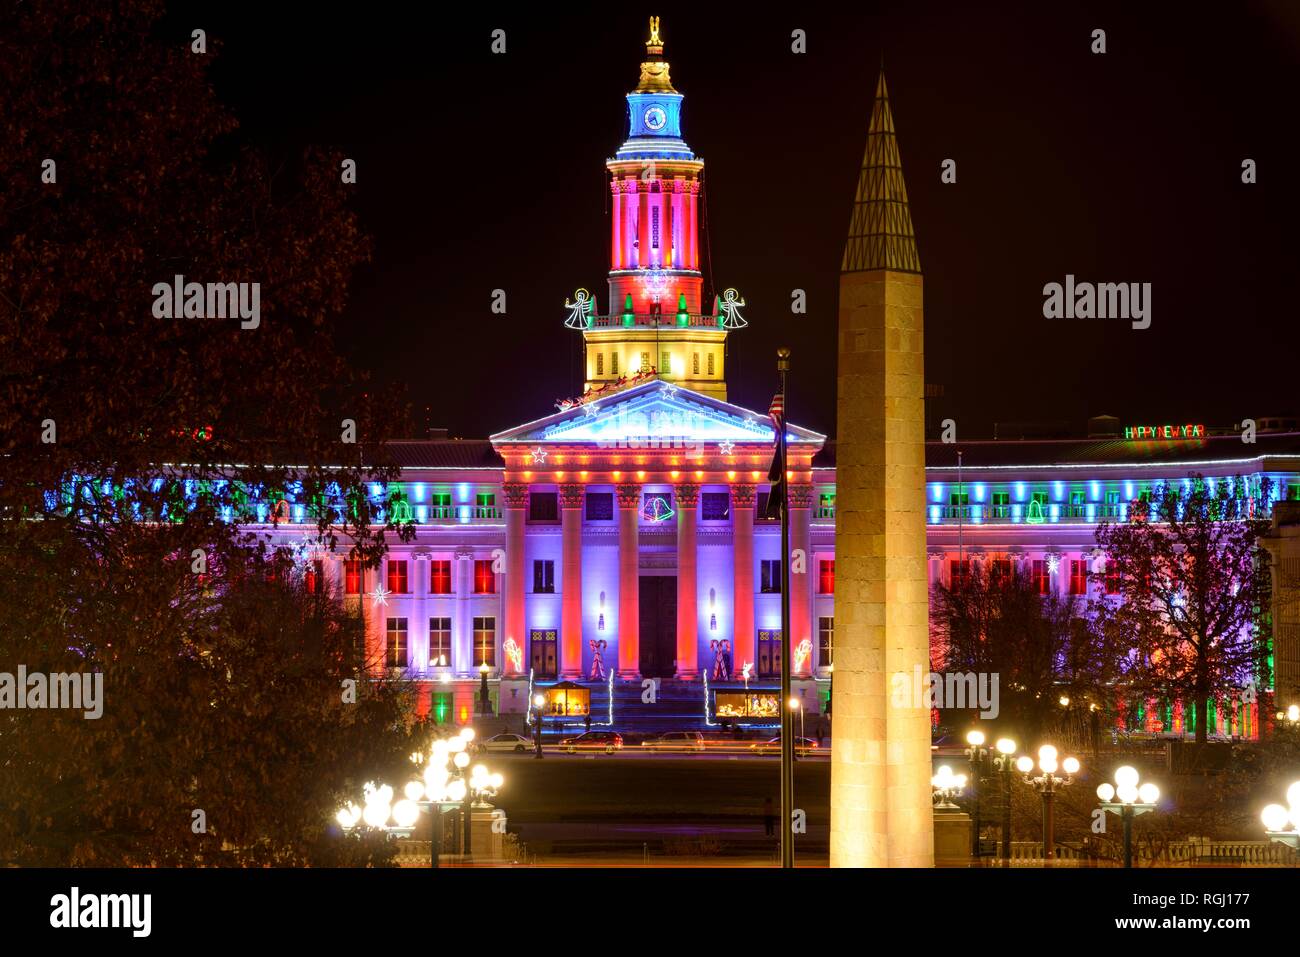 Night at Denver City Hall - During December holiday season, colorful lights lit up Denver City and County Building and War Memorial, Denver, CO, USA. Stock Photo